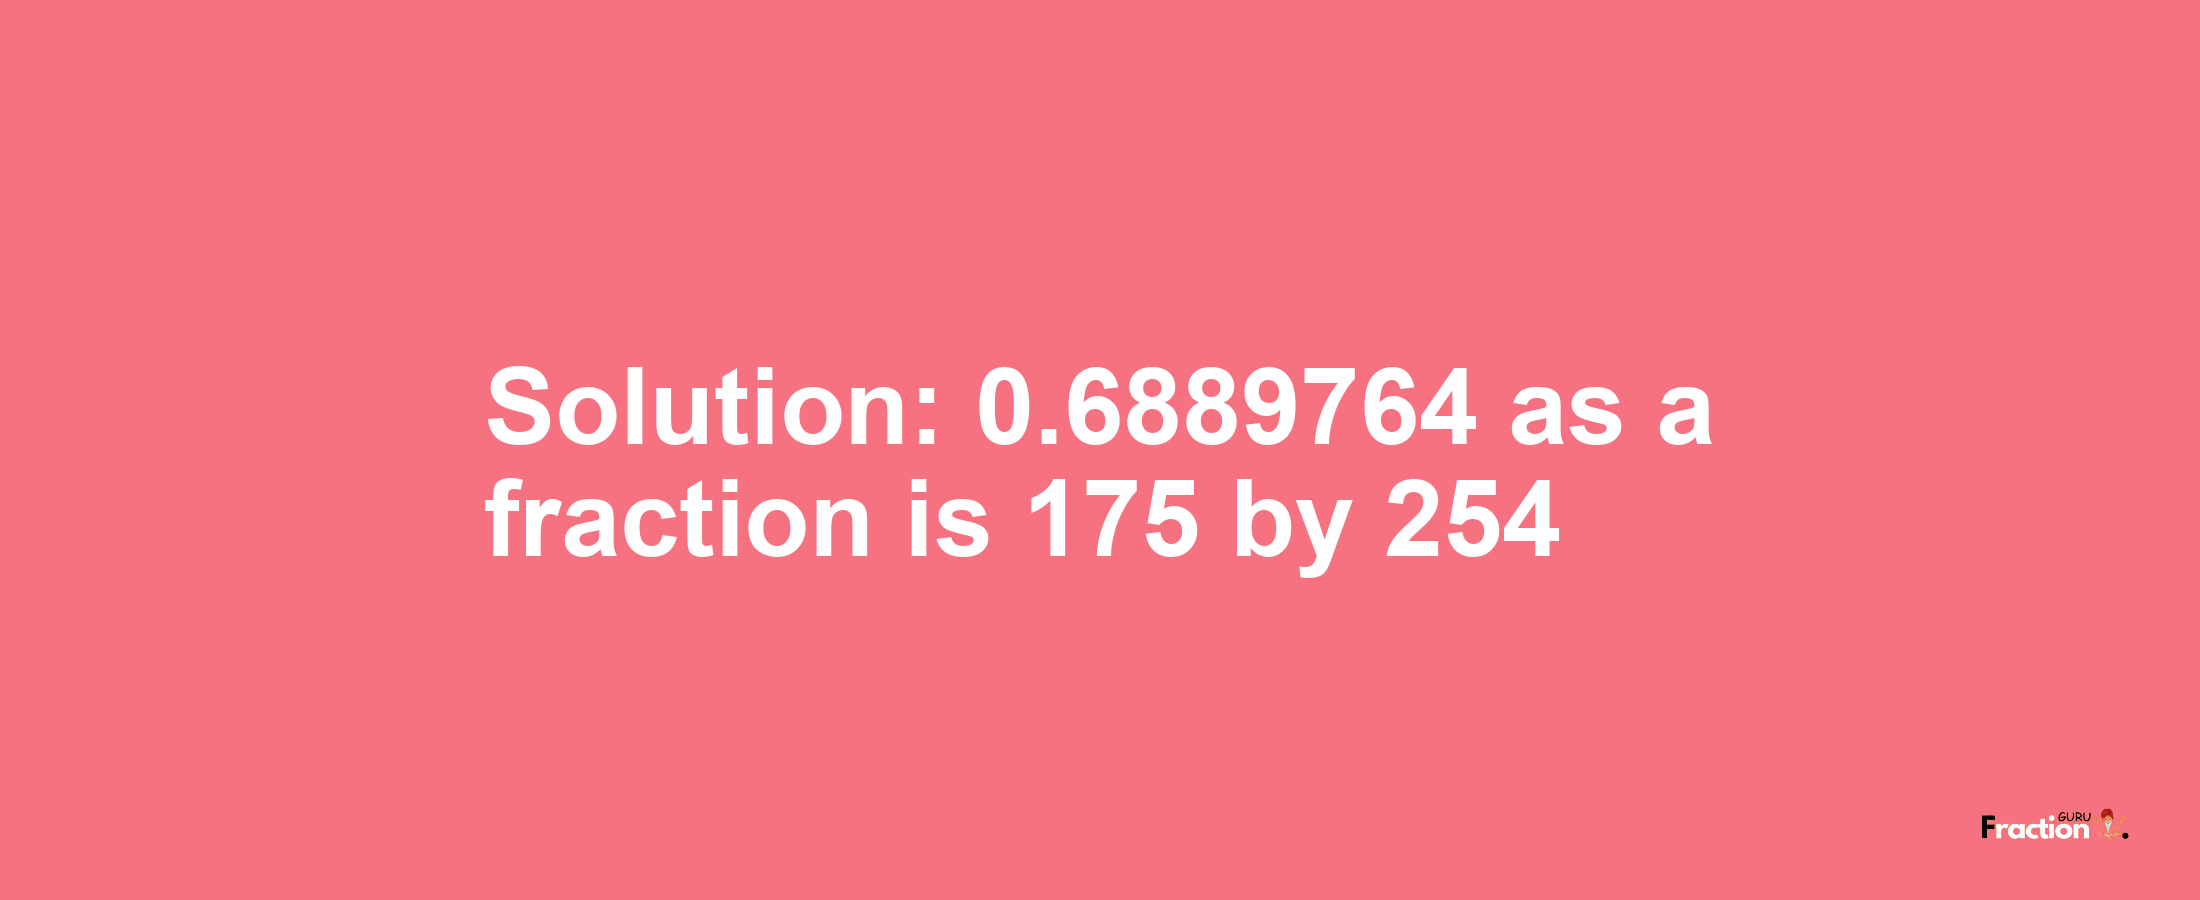 Solution:0.6889764 as a fraction is 175/254